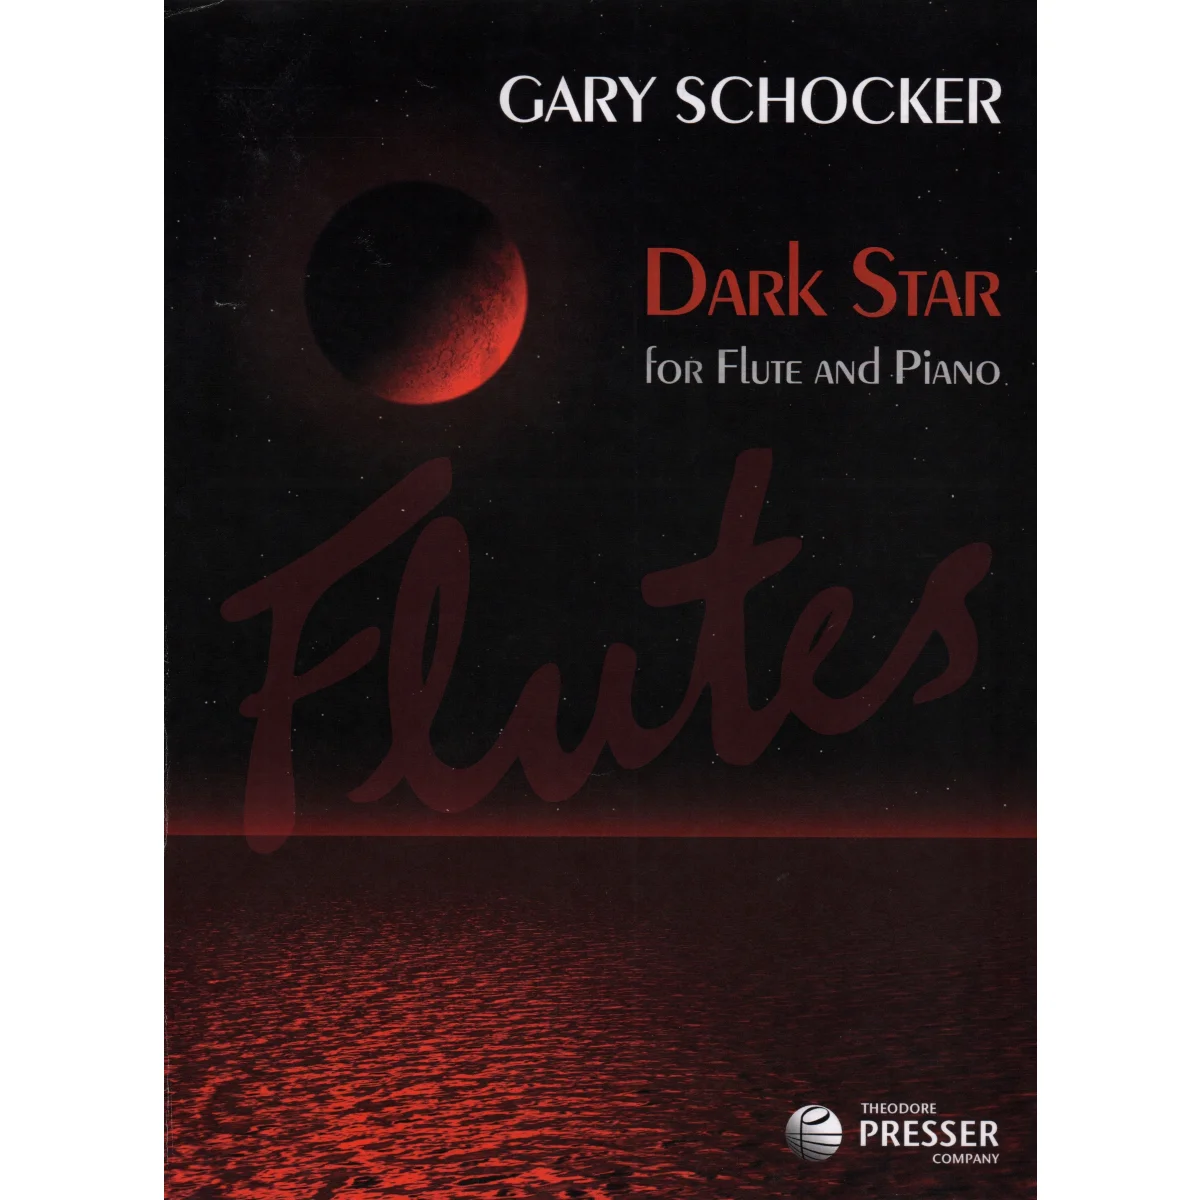 Dark Star for Flute and Piano